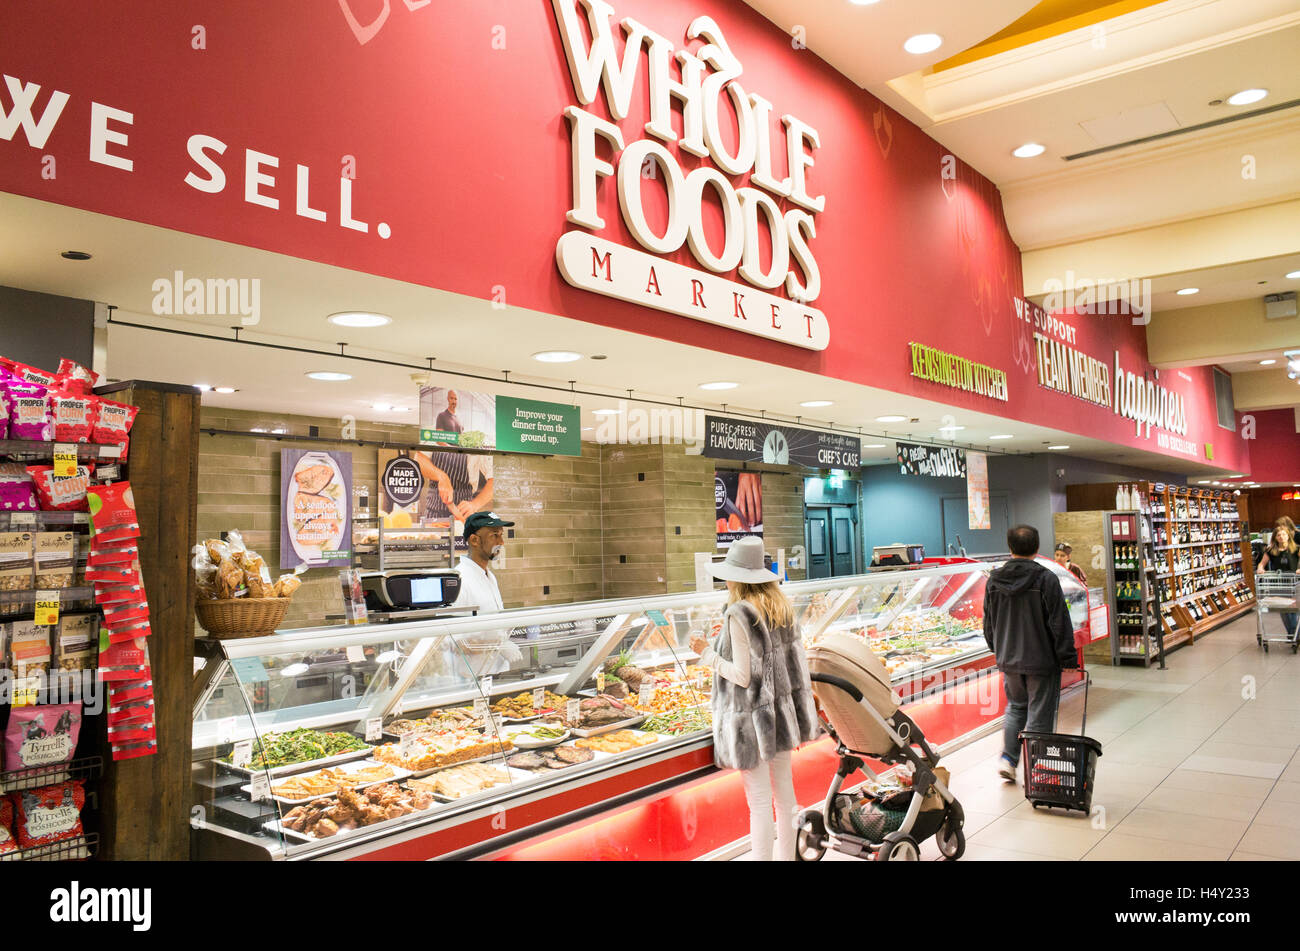 People shopping in Whole Foods Market in Kensington High Street, London, England, Regno Unito Foto Stock